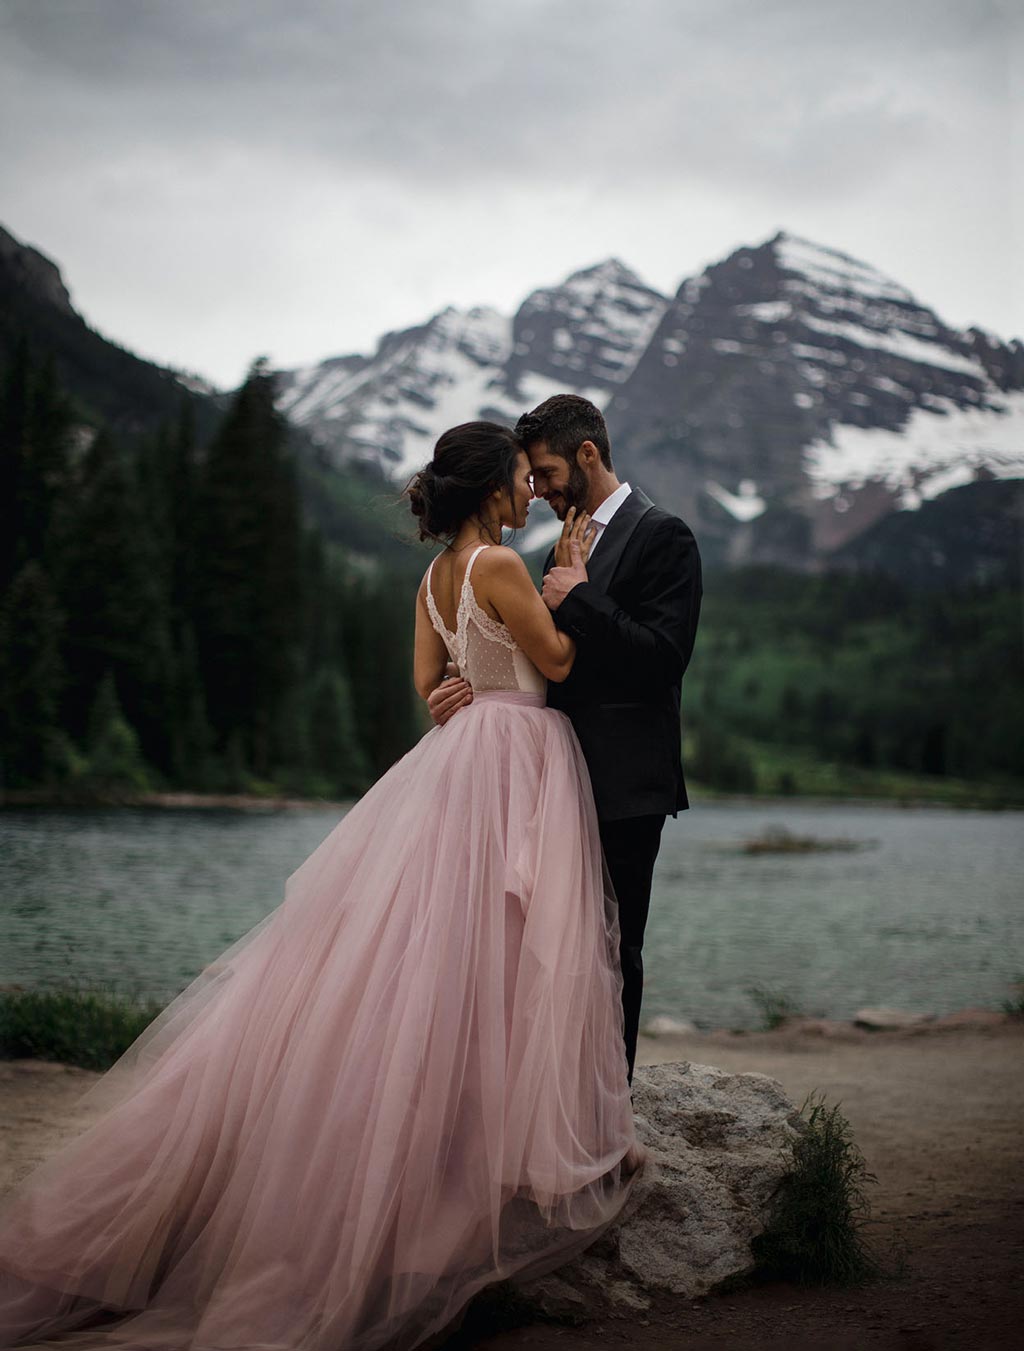 Newly married couple posing for wedding photos at Maroon Bells in Colorado